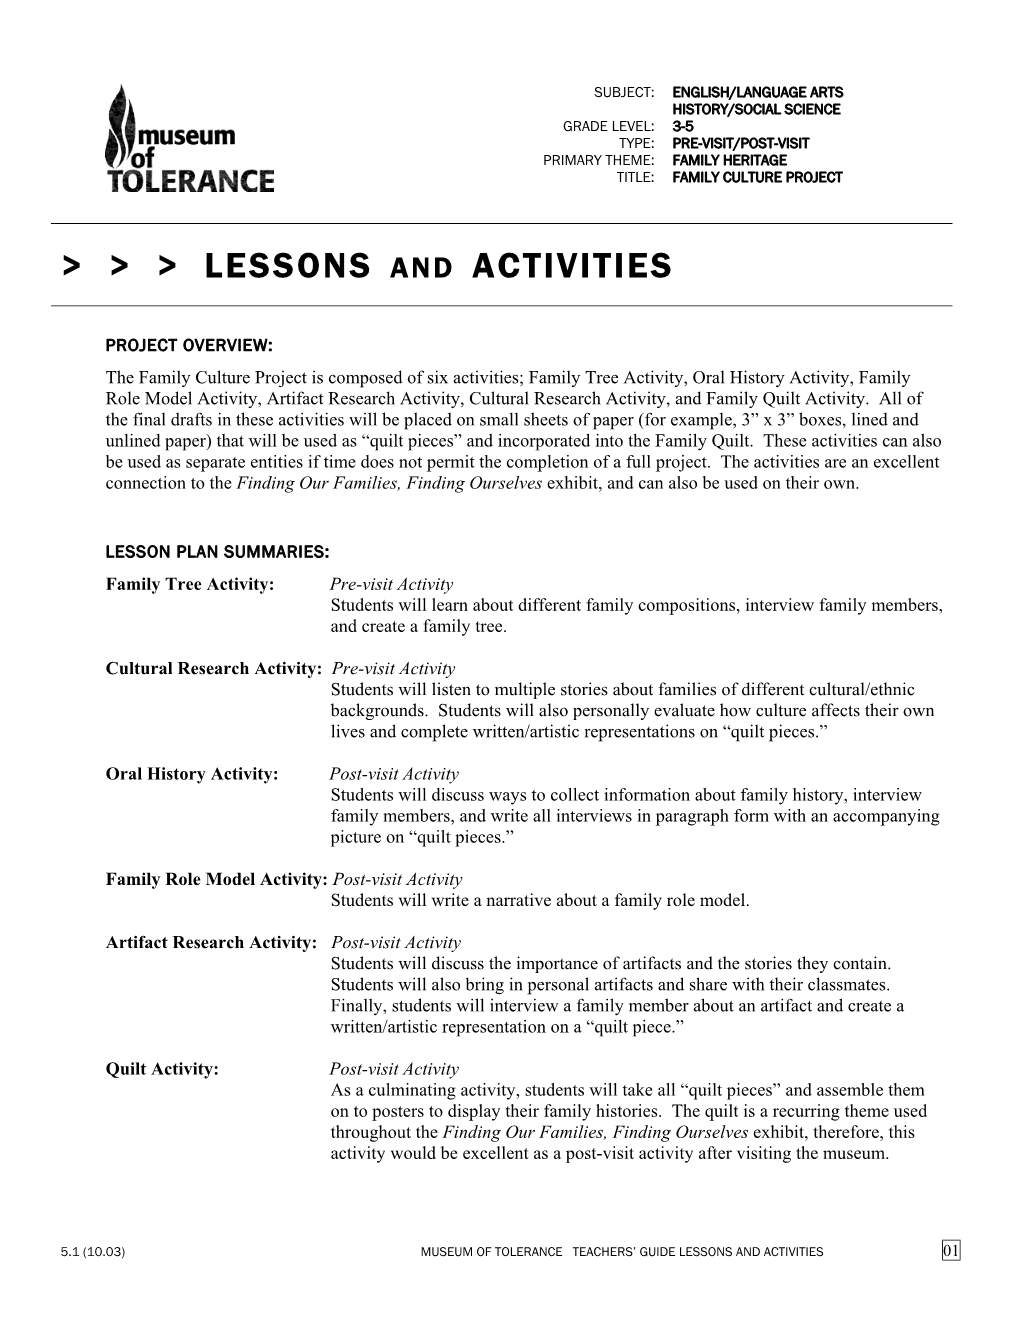 Lessons and Activities